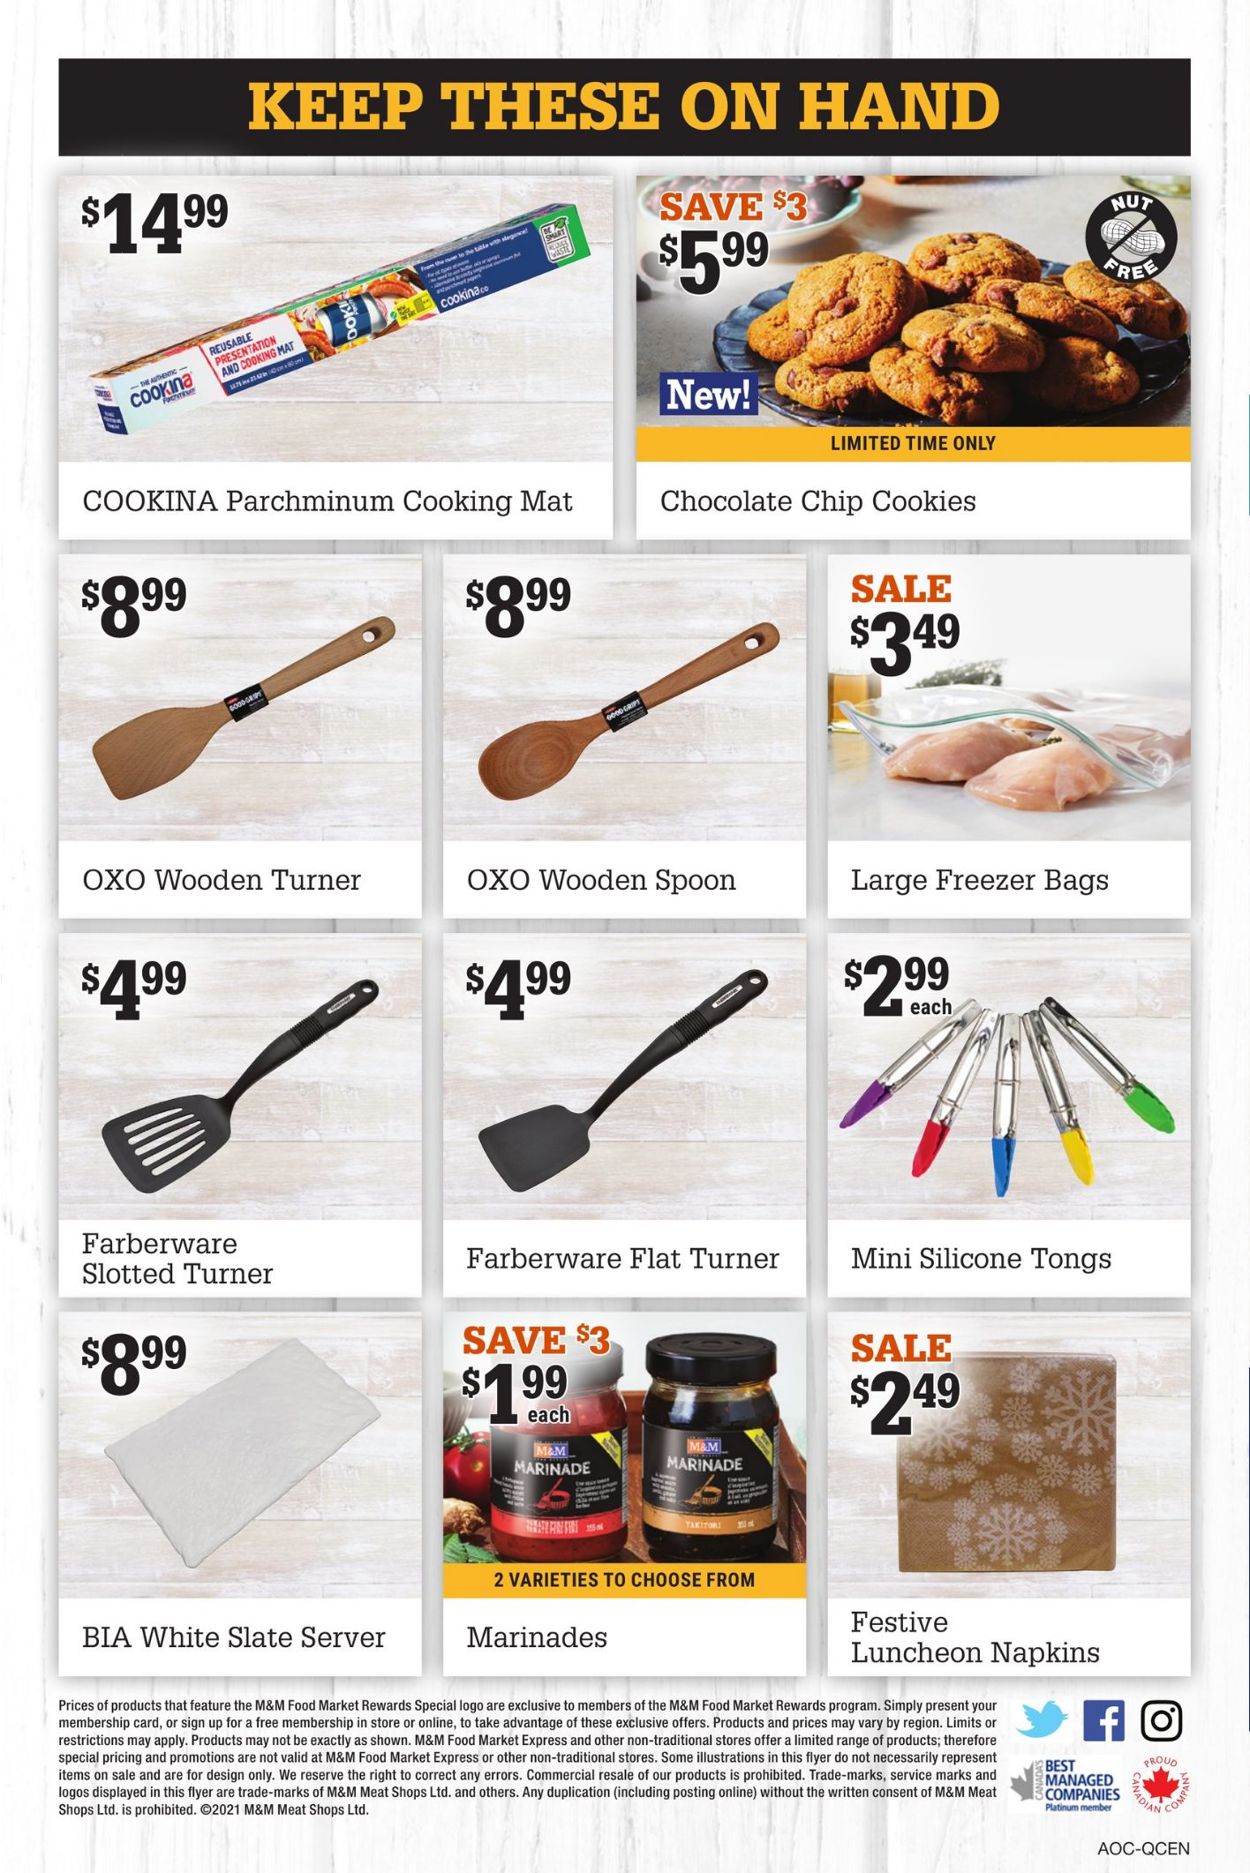 M&M Food Market Flyer from 12/30/2021